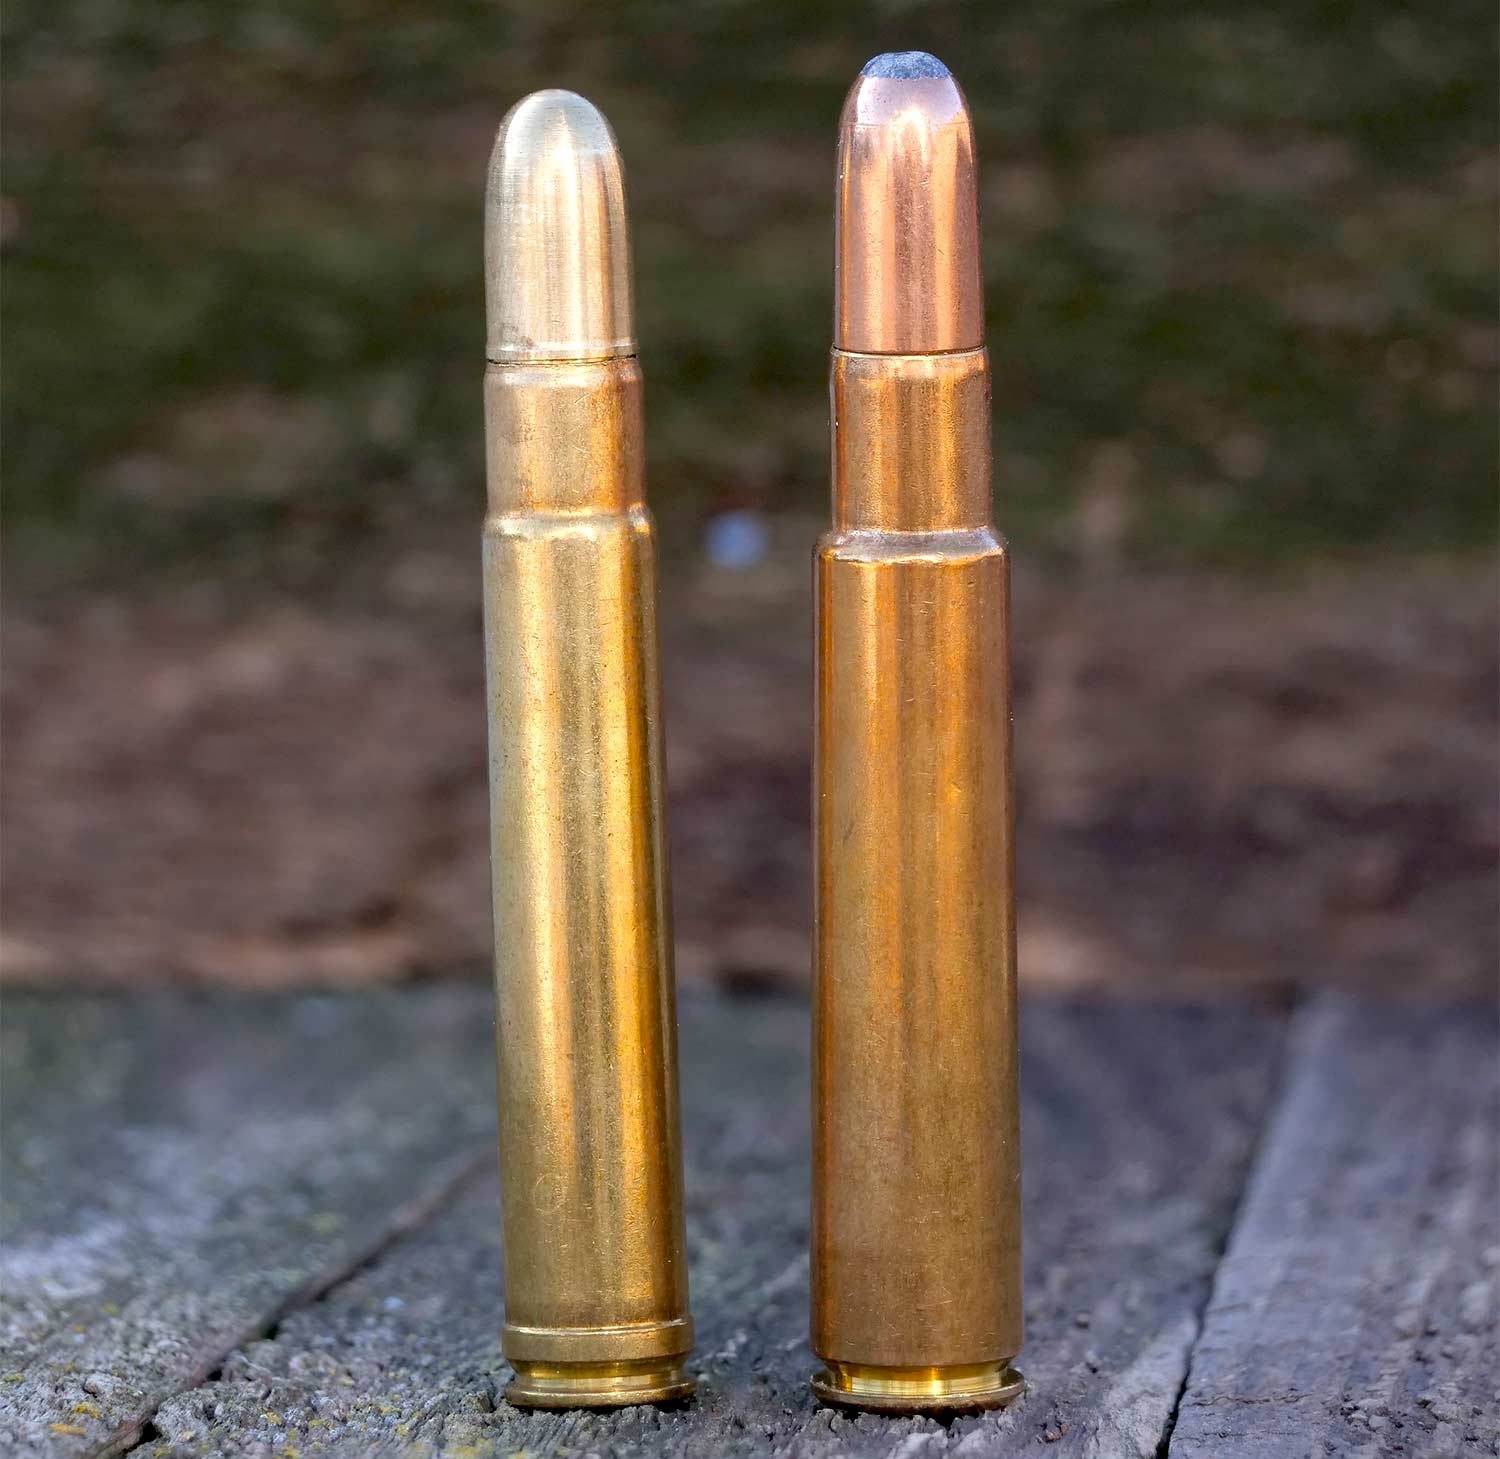 .426 Rem. Mag. and 416 rigby ammo on a wooden table